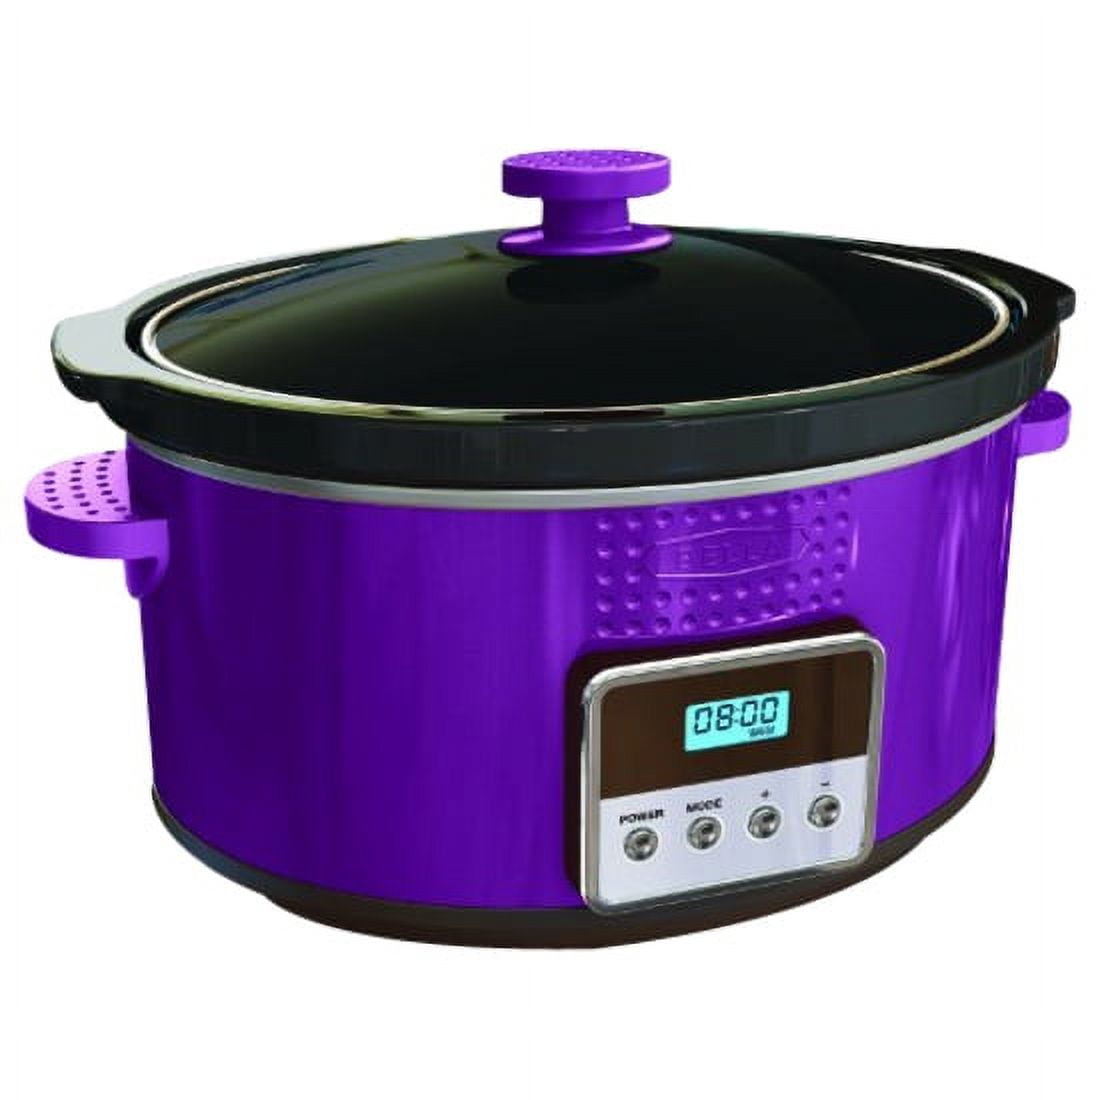 Bella Dots Collection 5QT Programmable Slow Cooker 